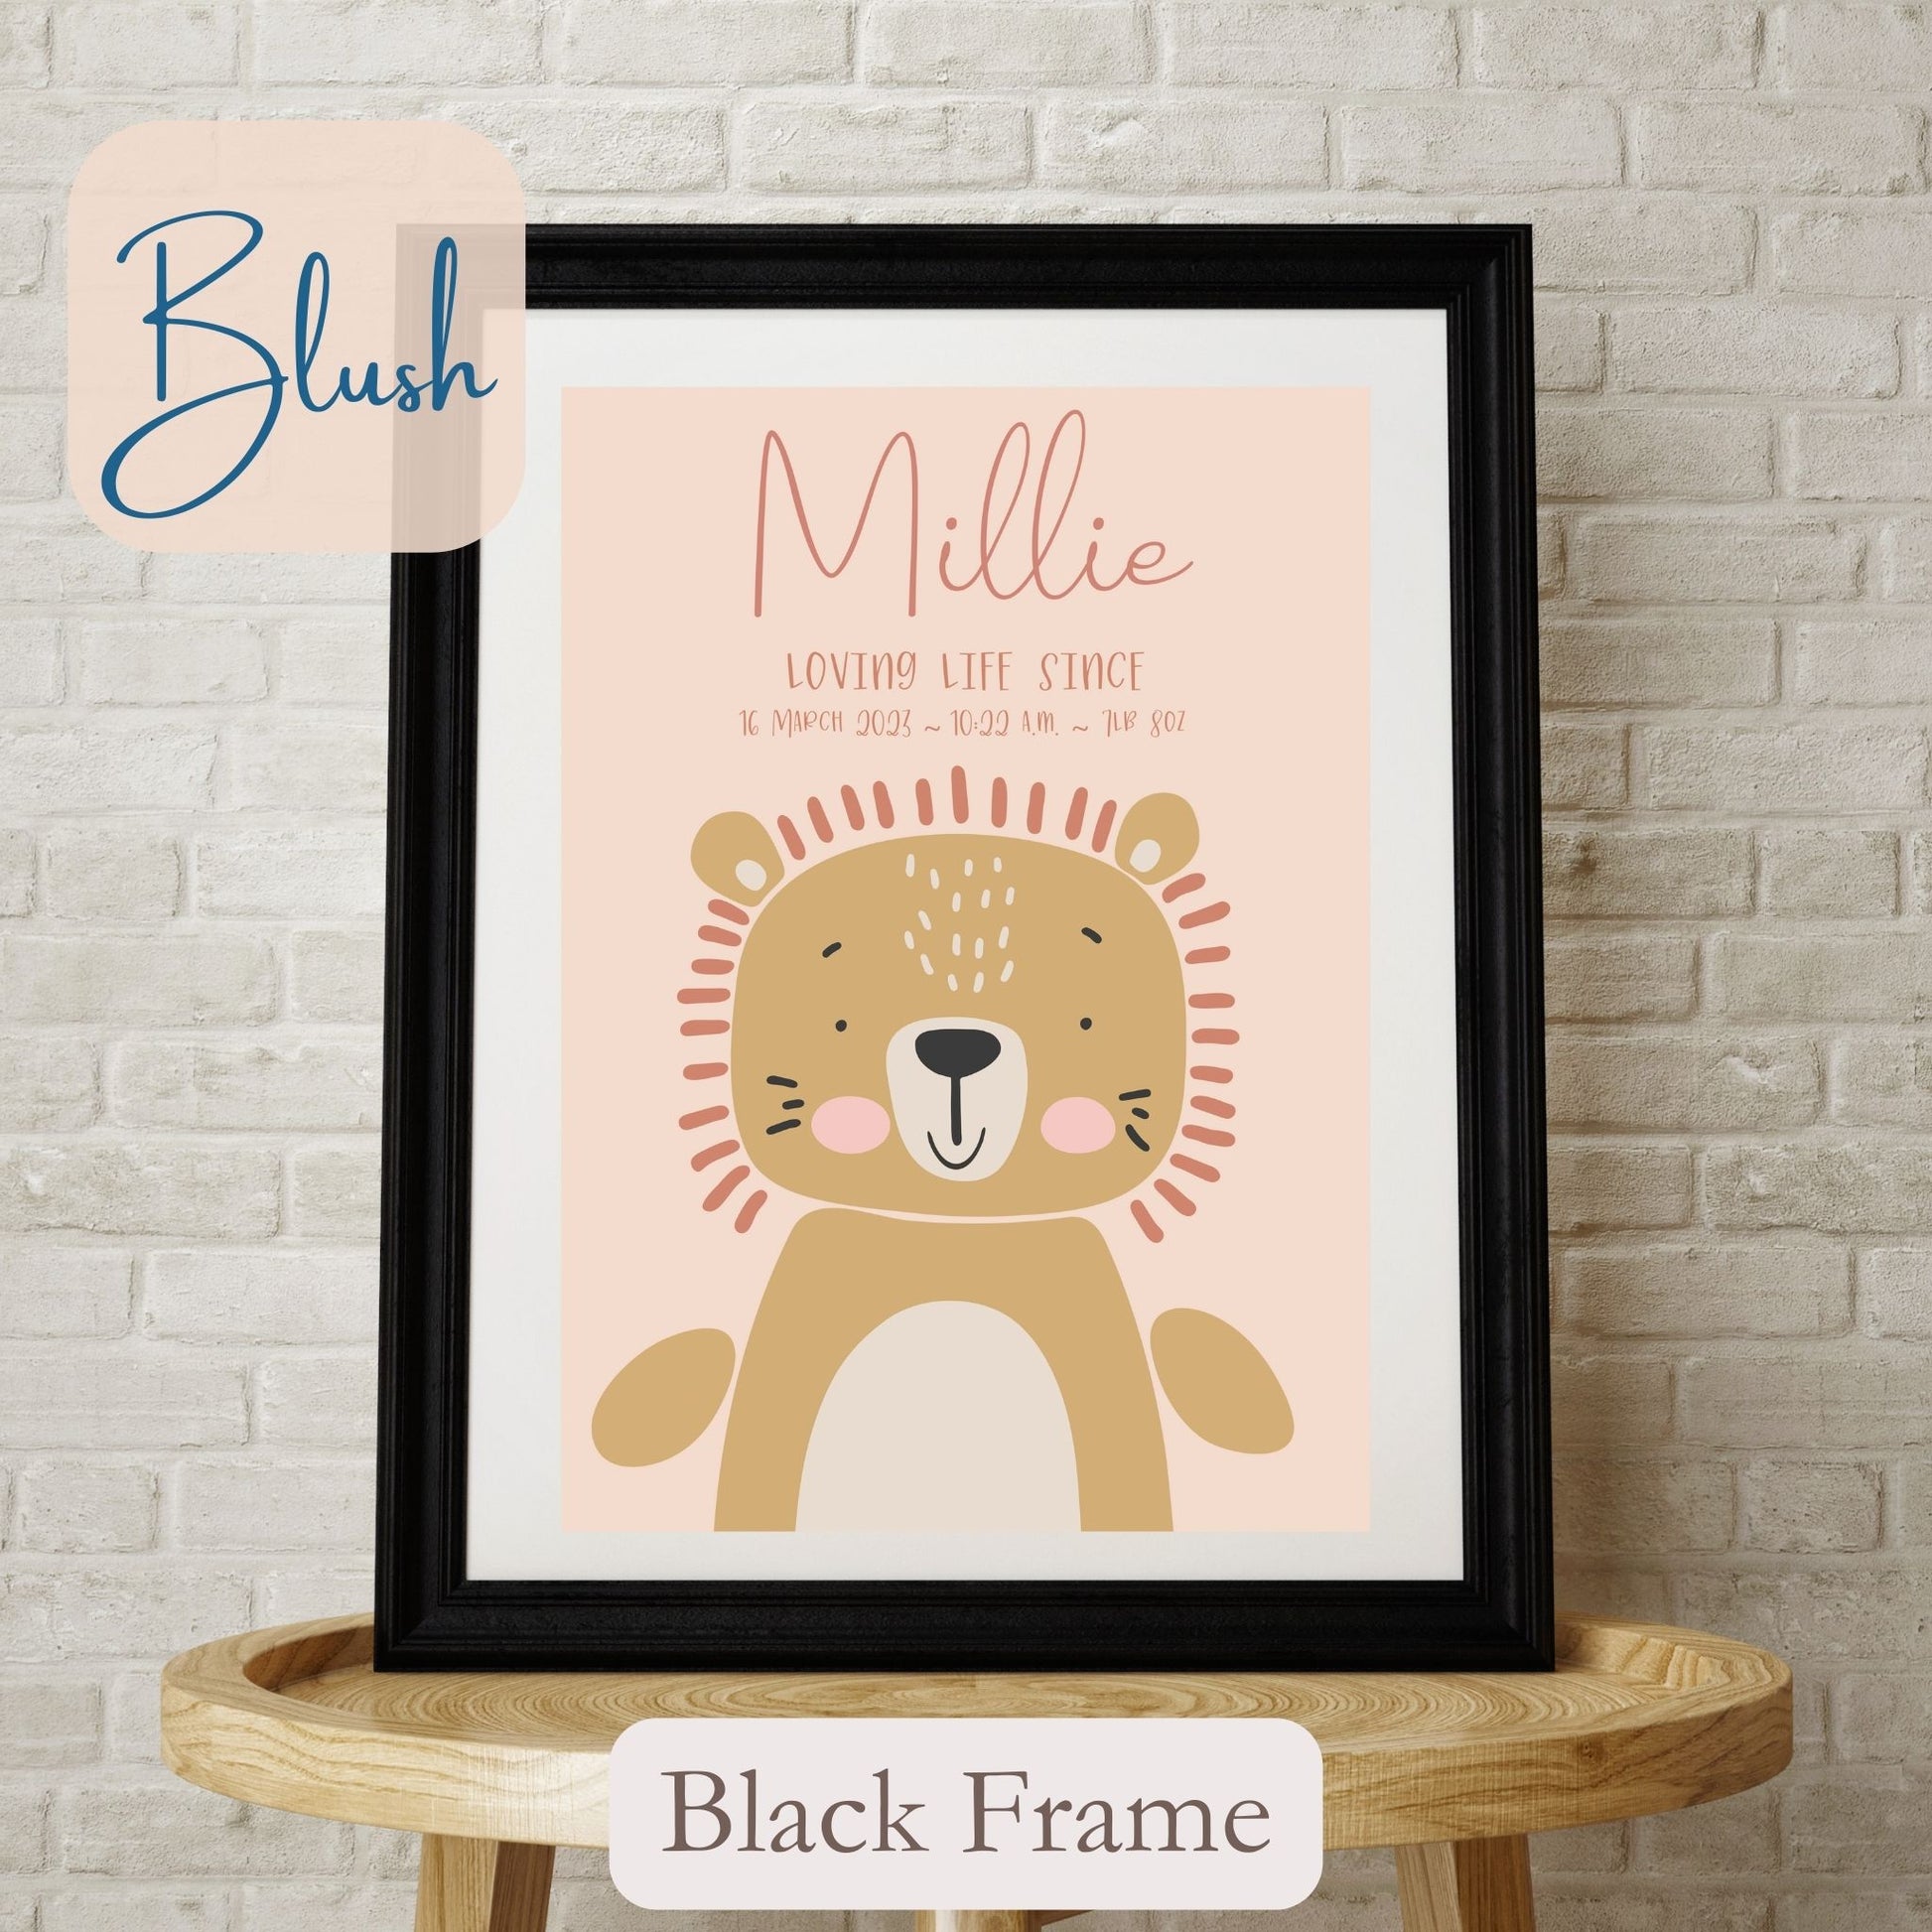 Personalised Framed Print with cute Lion, on blush coloured background with child’s name, and wording under name. Black Frame.